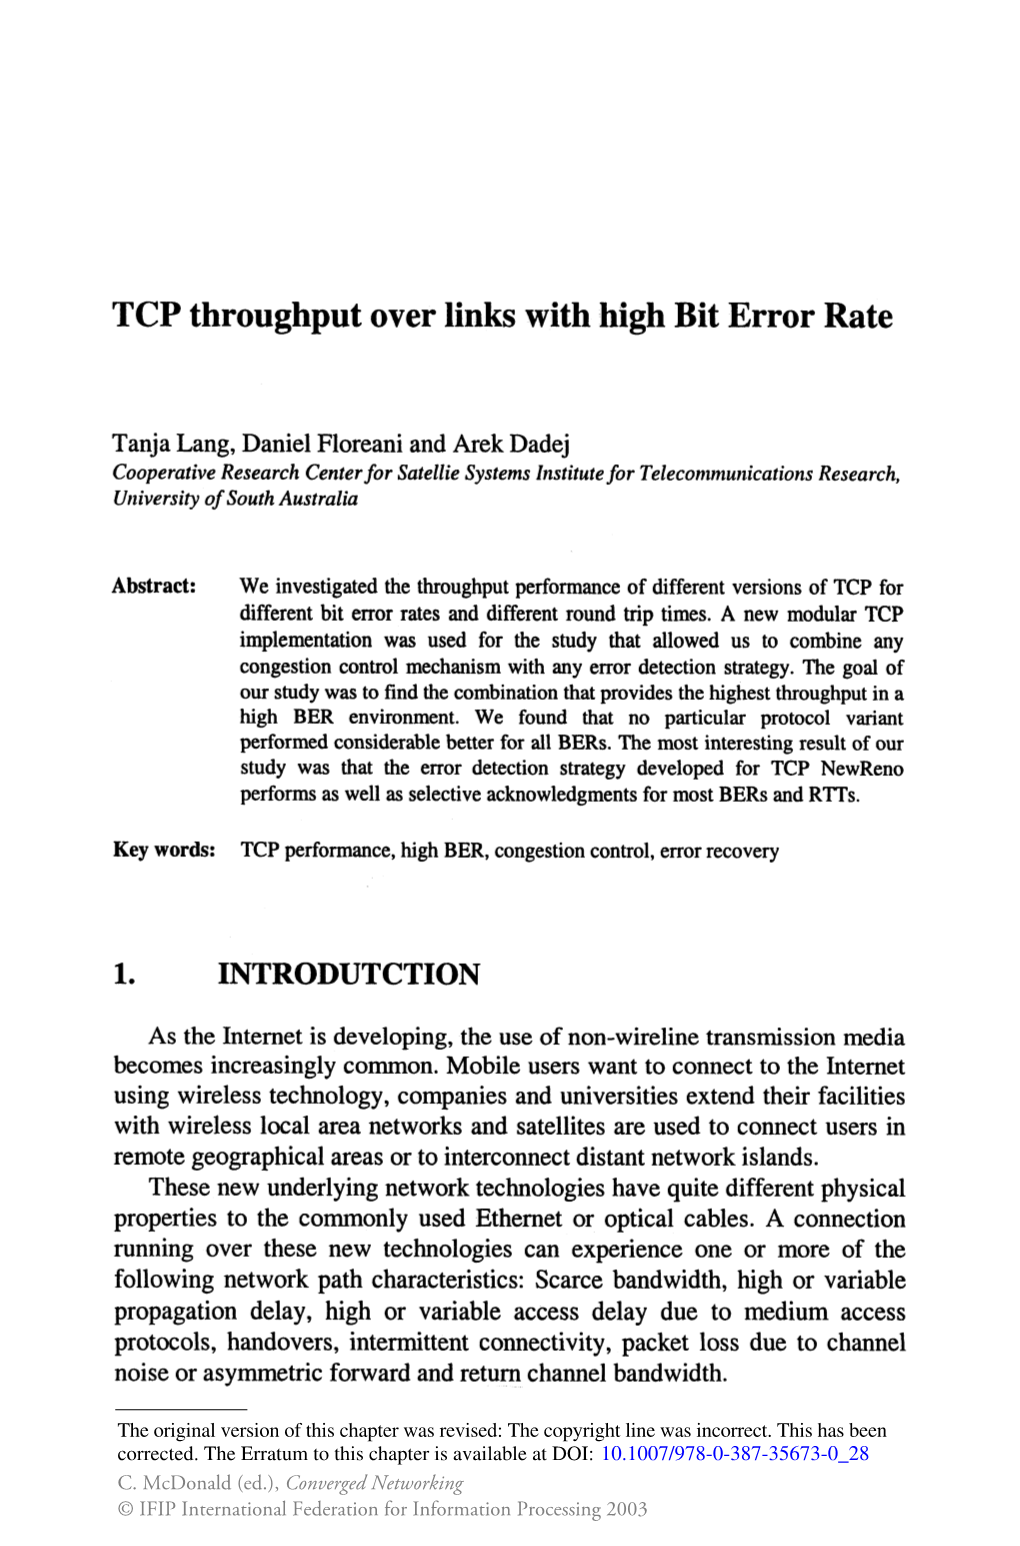 TCP Throughput Over Links with High Bit Error Rate